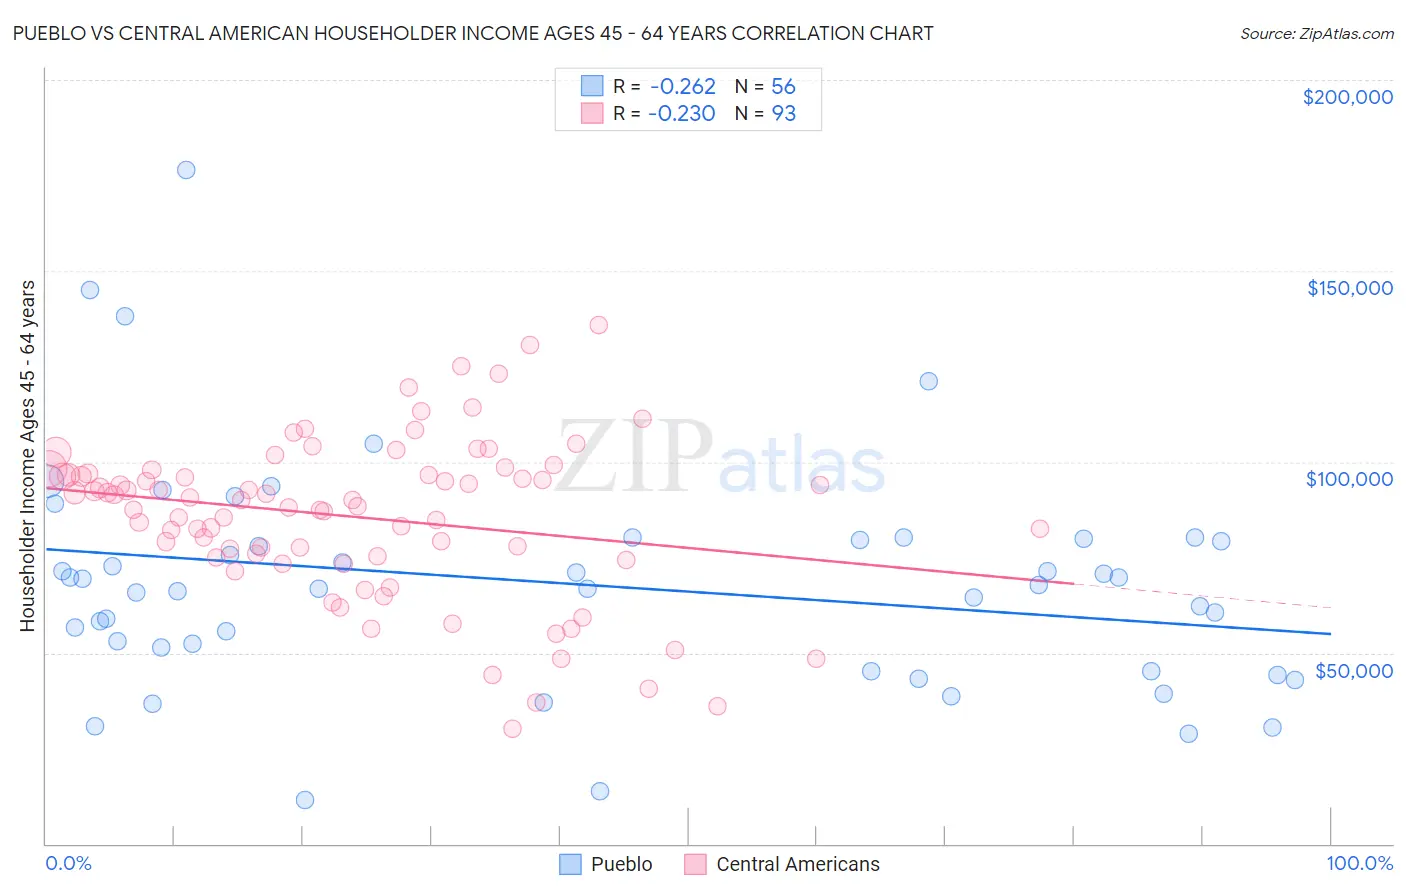 Pueblo vs Central American Householder Income Ages 45 - 64 years